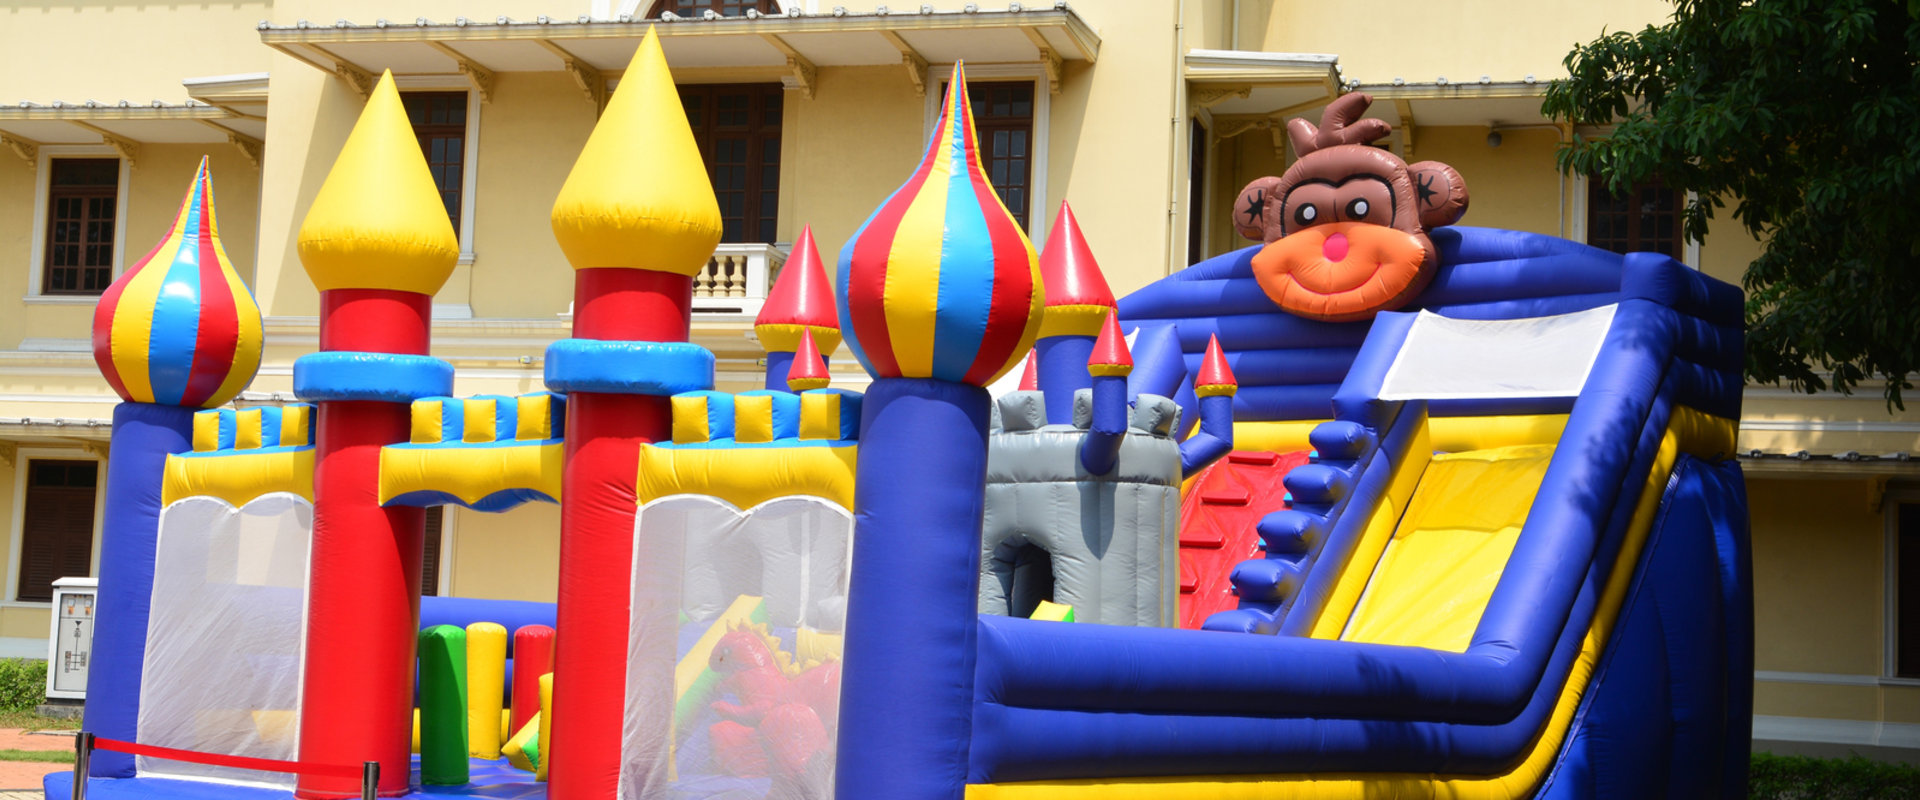 5 Reasons Why Bounce House Rentals Make Your Plymouth Outdoor Excursion Even Better